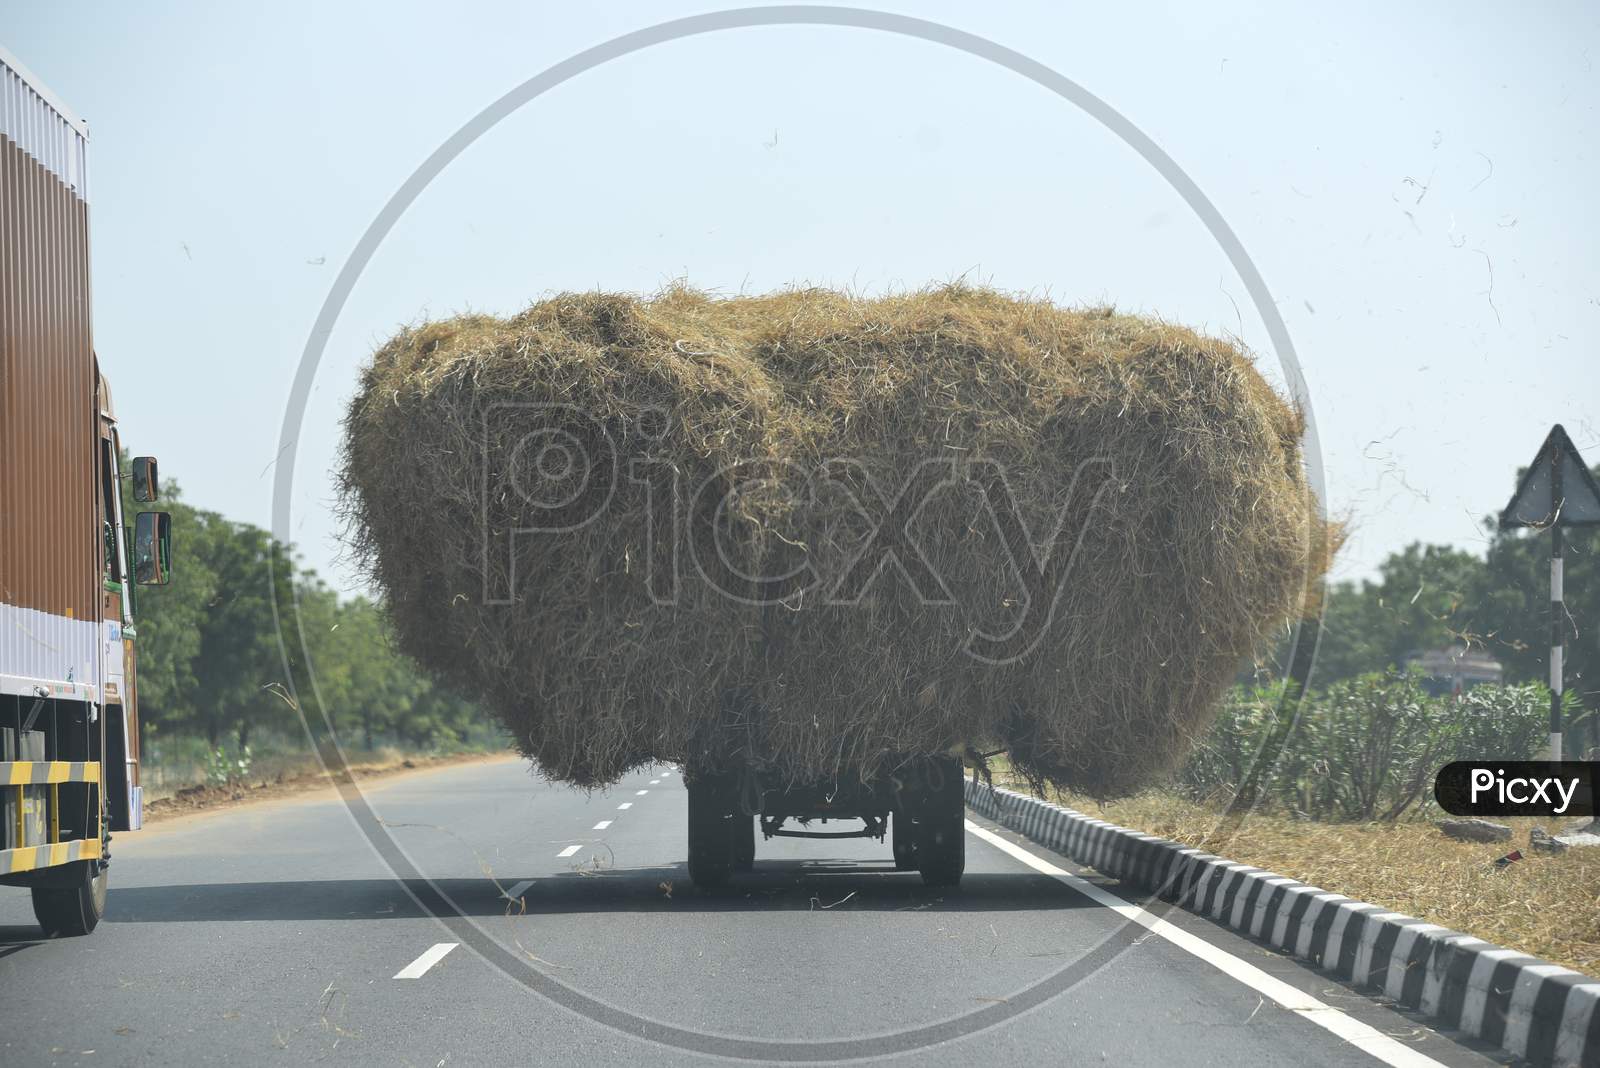 A tractor carrying Hay